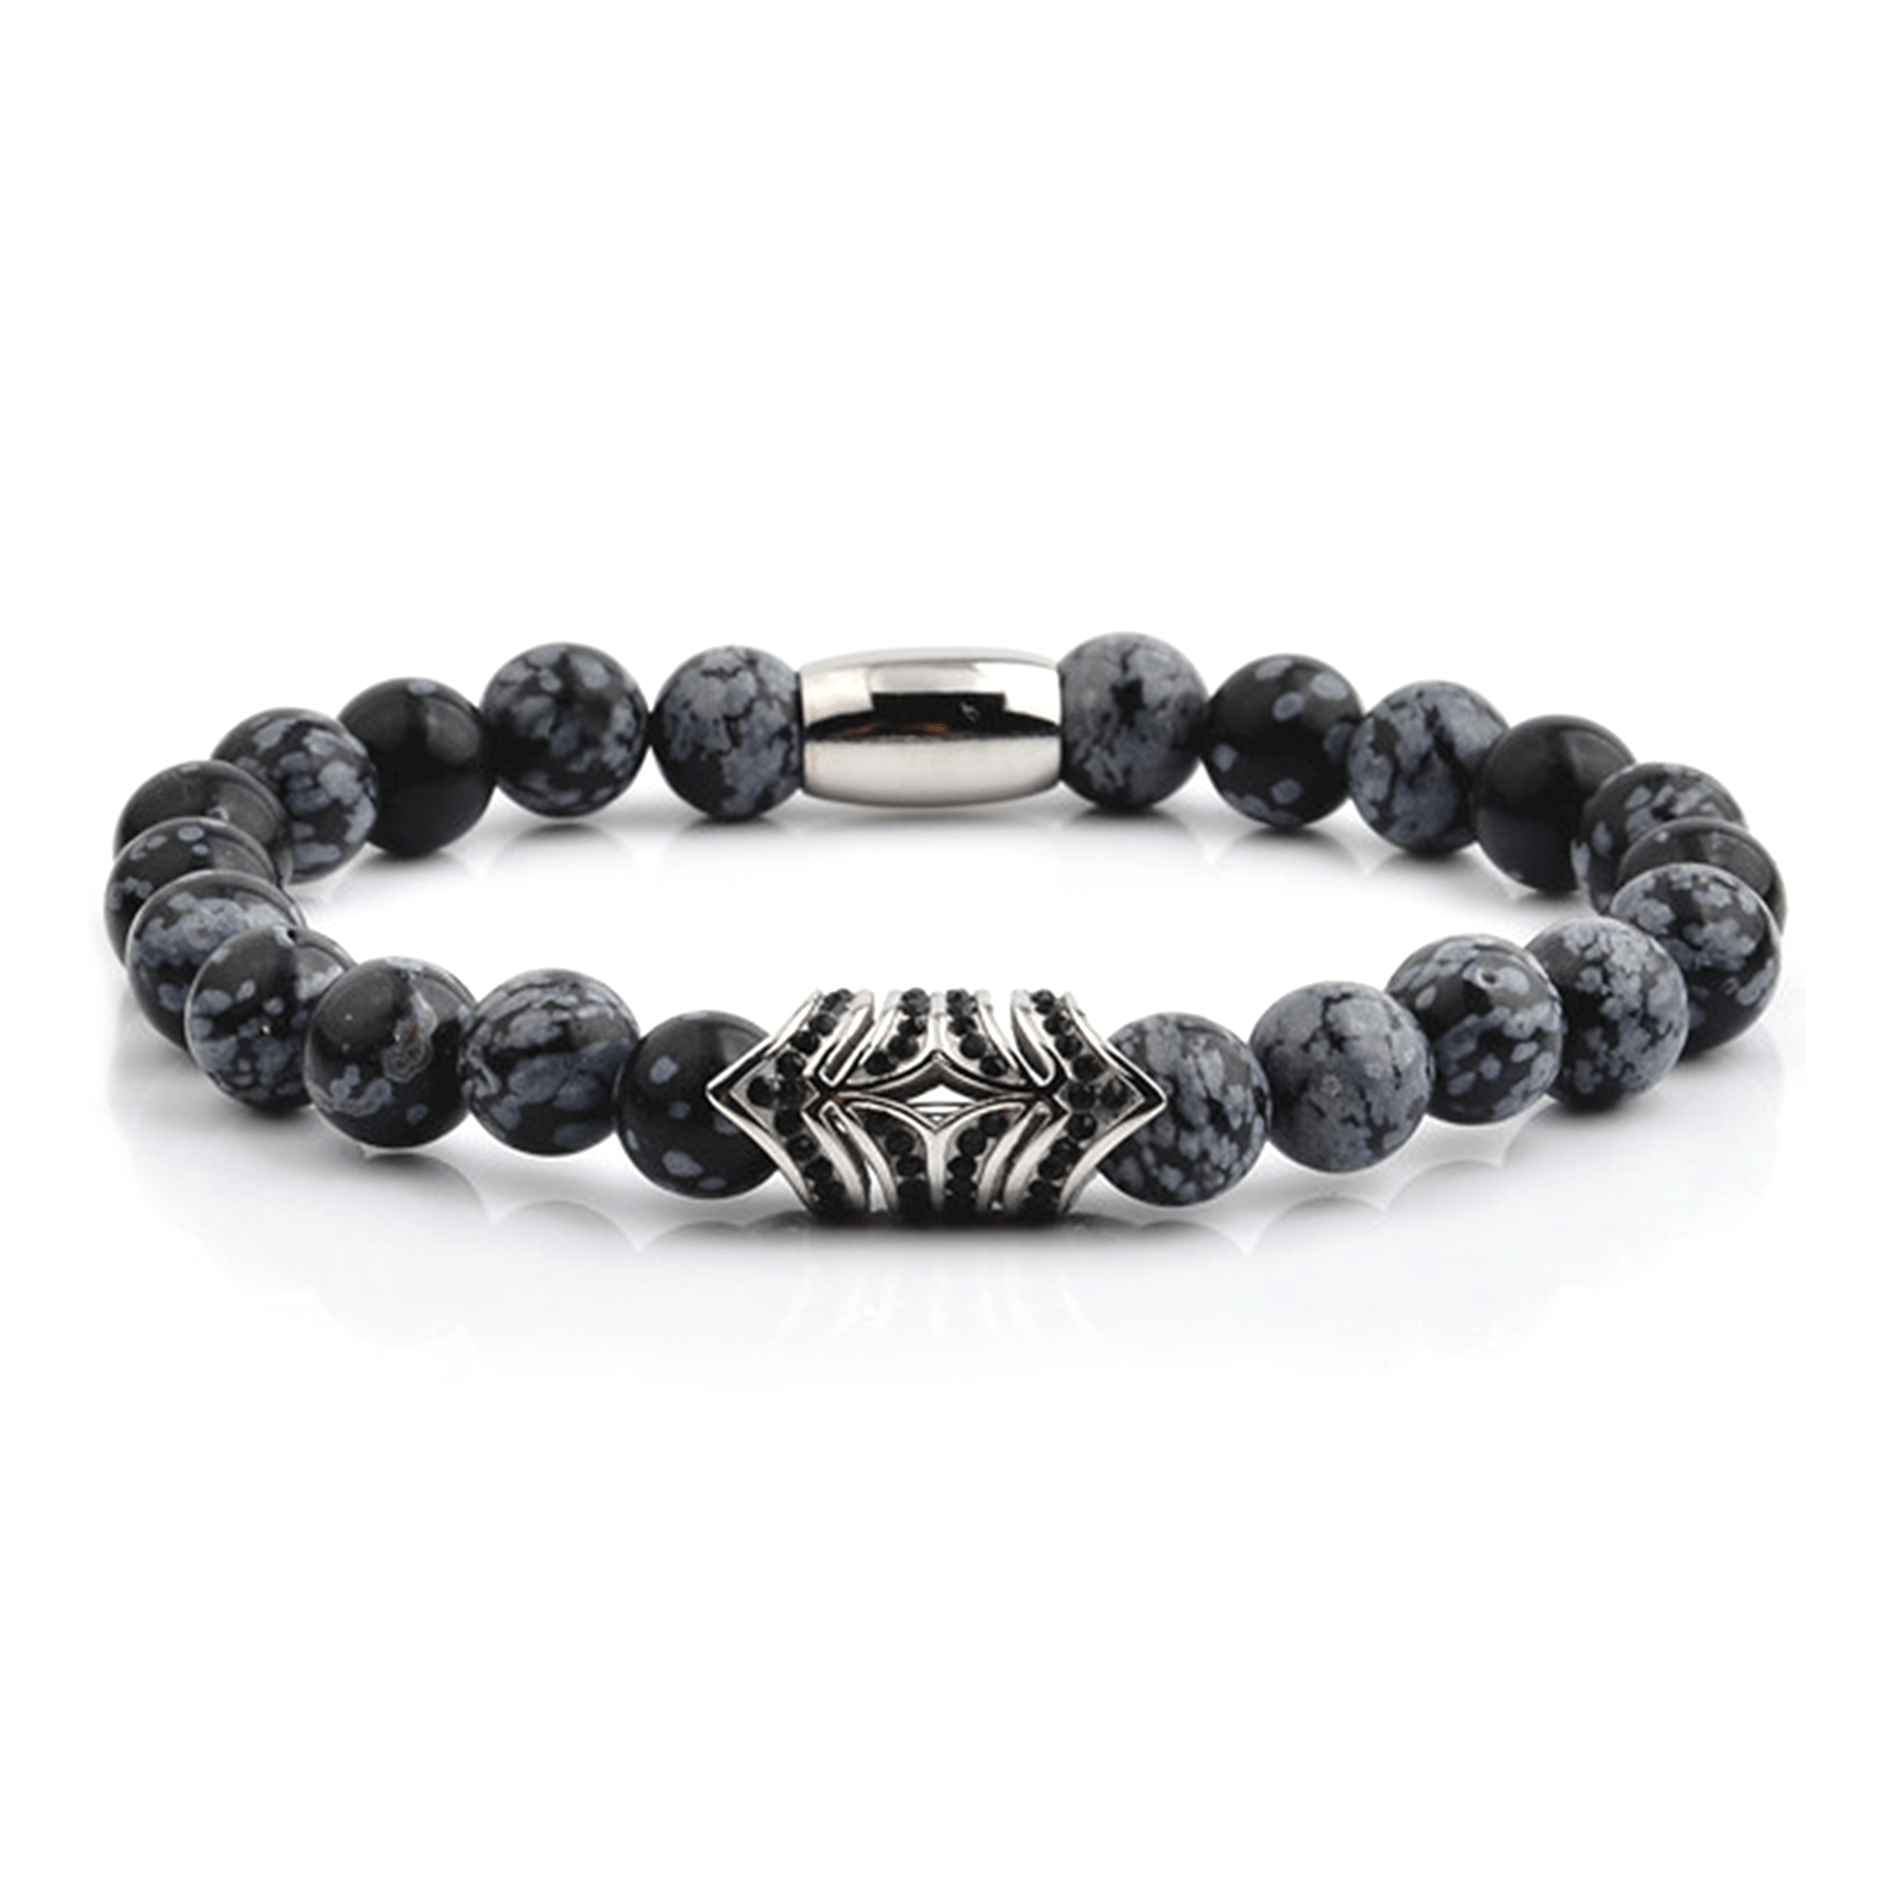 HYLIZO X Series 451 - Black Marble beaded bracelet with 316 Stainless Steel with black stone